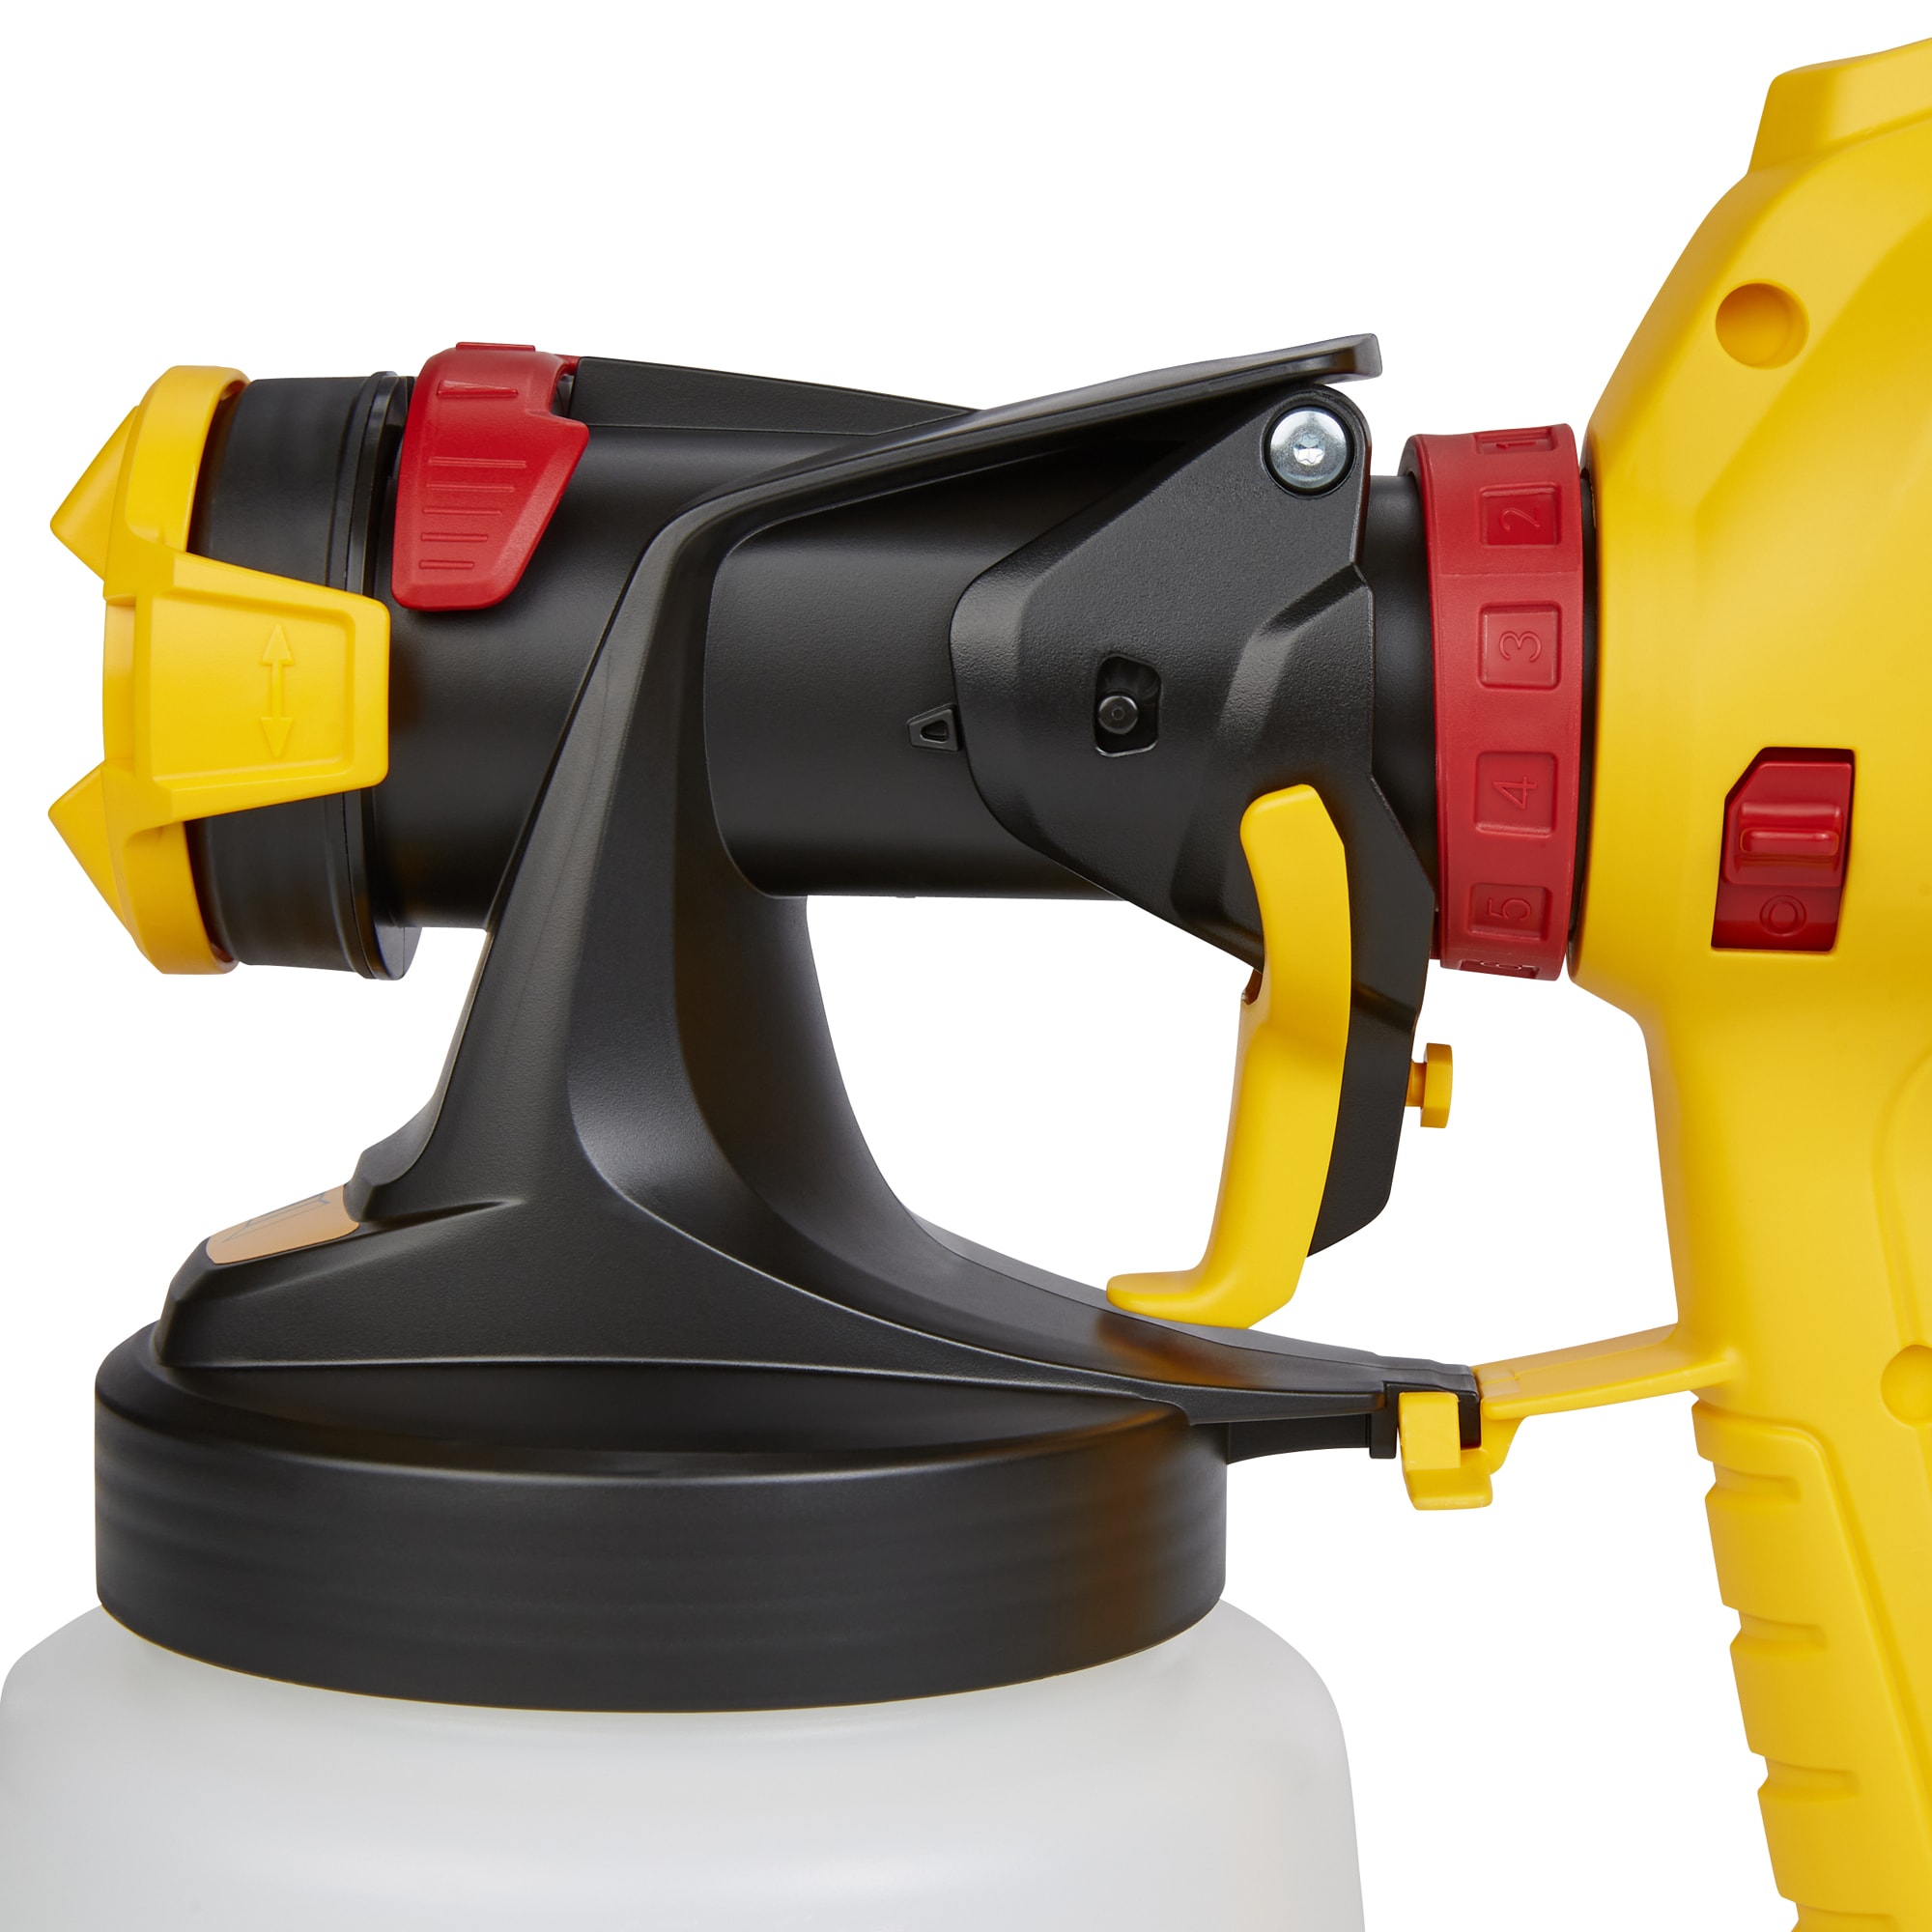 Wagner FLEXiO 3550 18V Cordless Handheld HVLP Paint and Stain